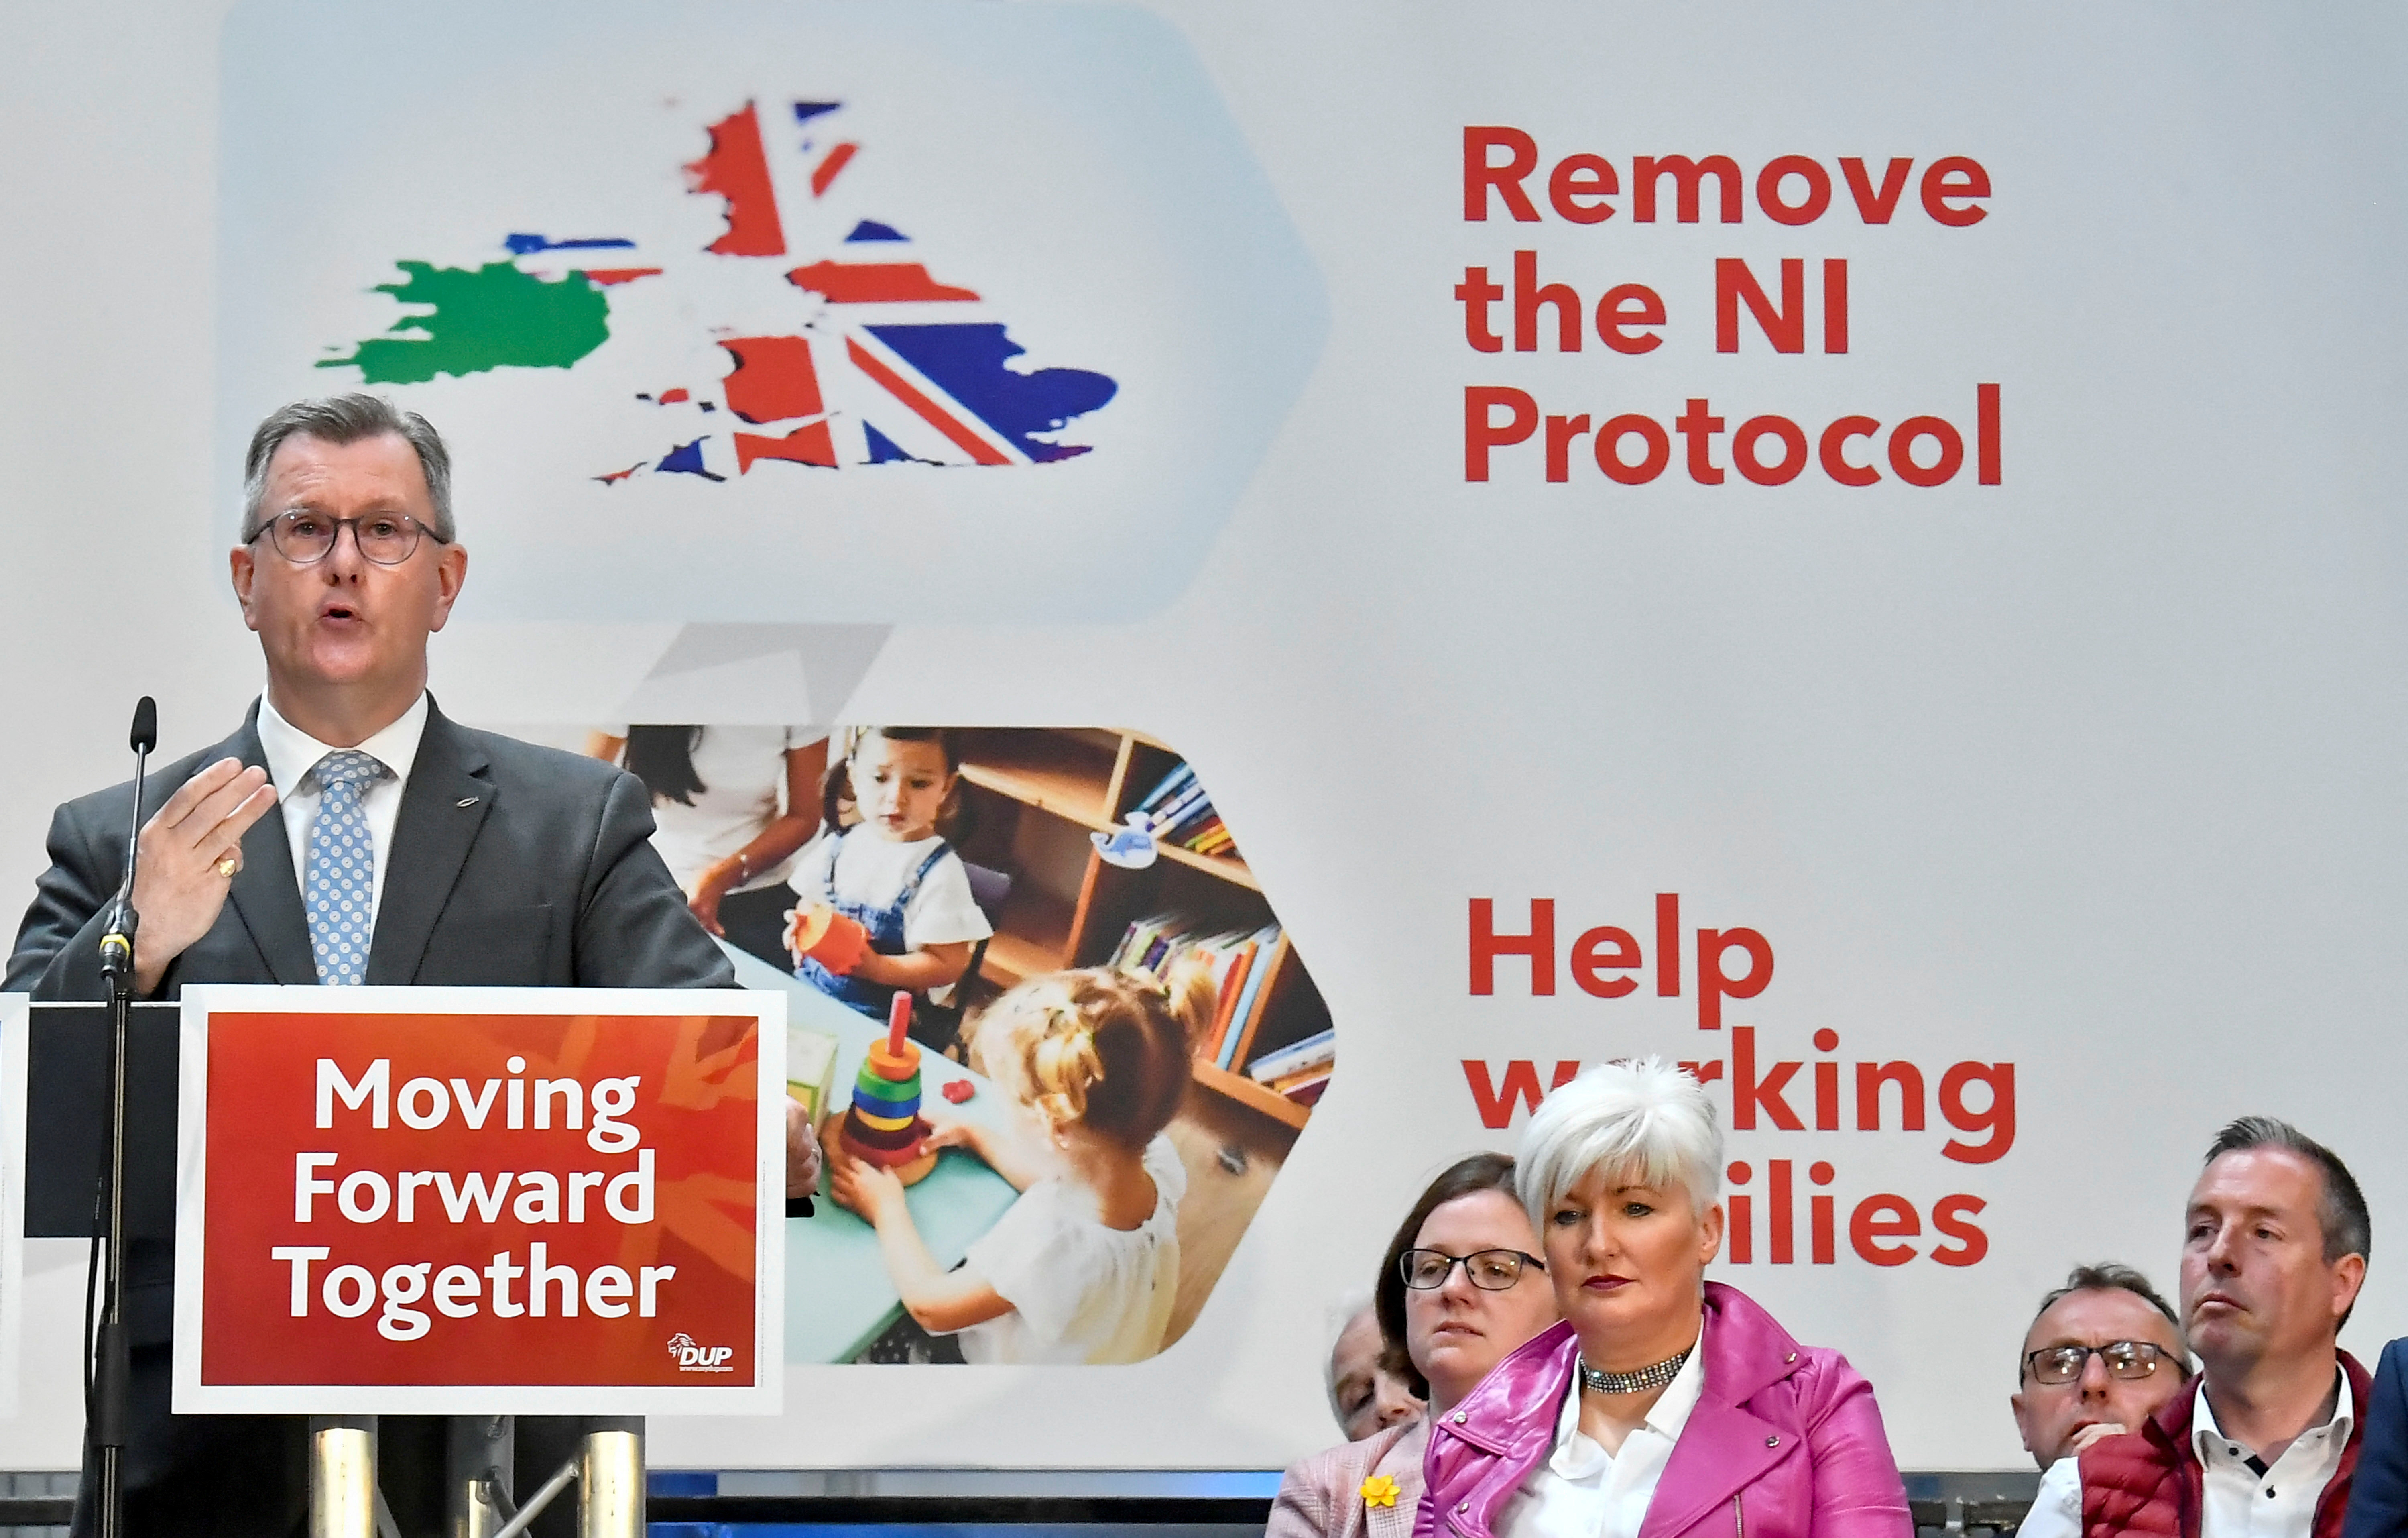 image Speculation on Northern Ireland protocol deal premature, DUP leader says